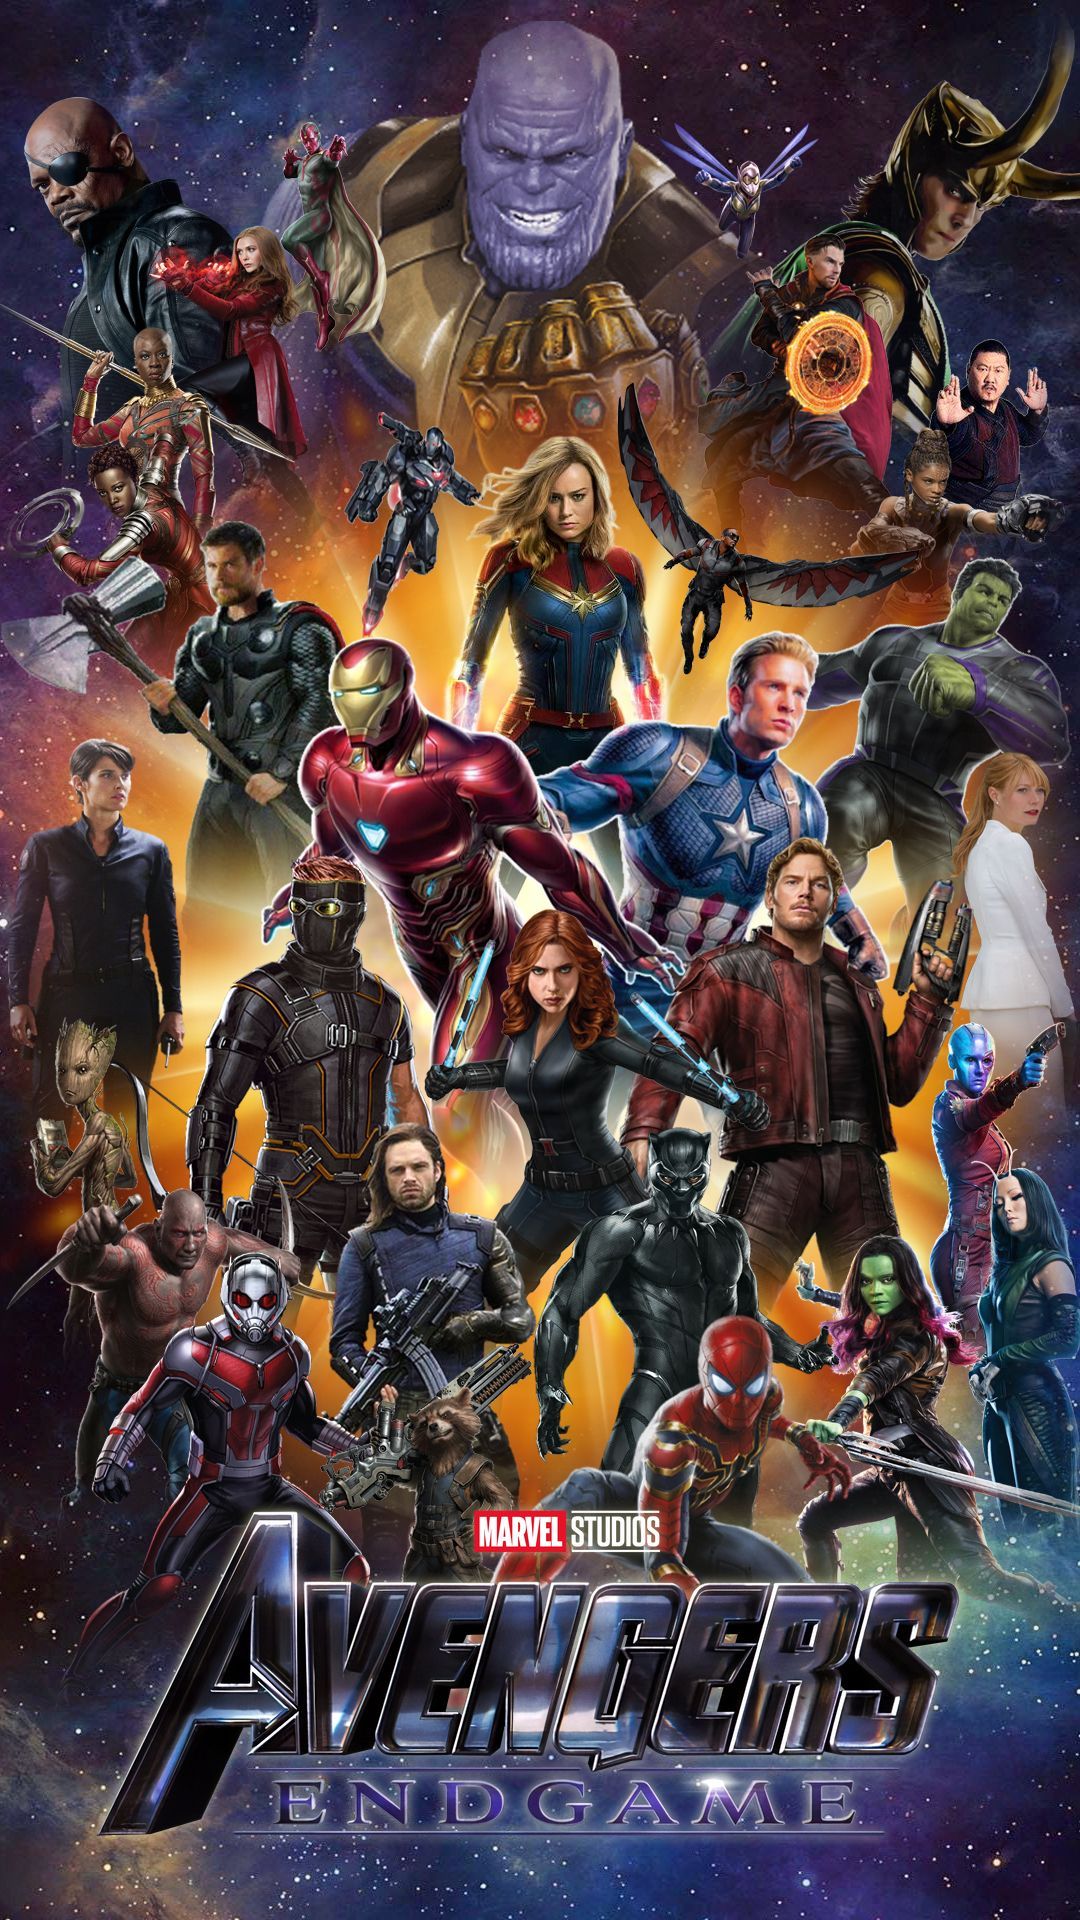 Avengers End Game Wallpaper High Definition Hupages Download iPhone Wallpaper. Dc comics vs marvel, Marvel superheroes, Marvel superhero posters